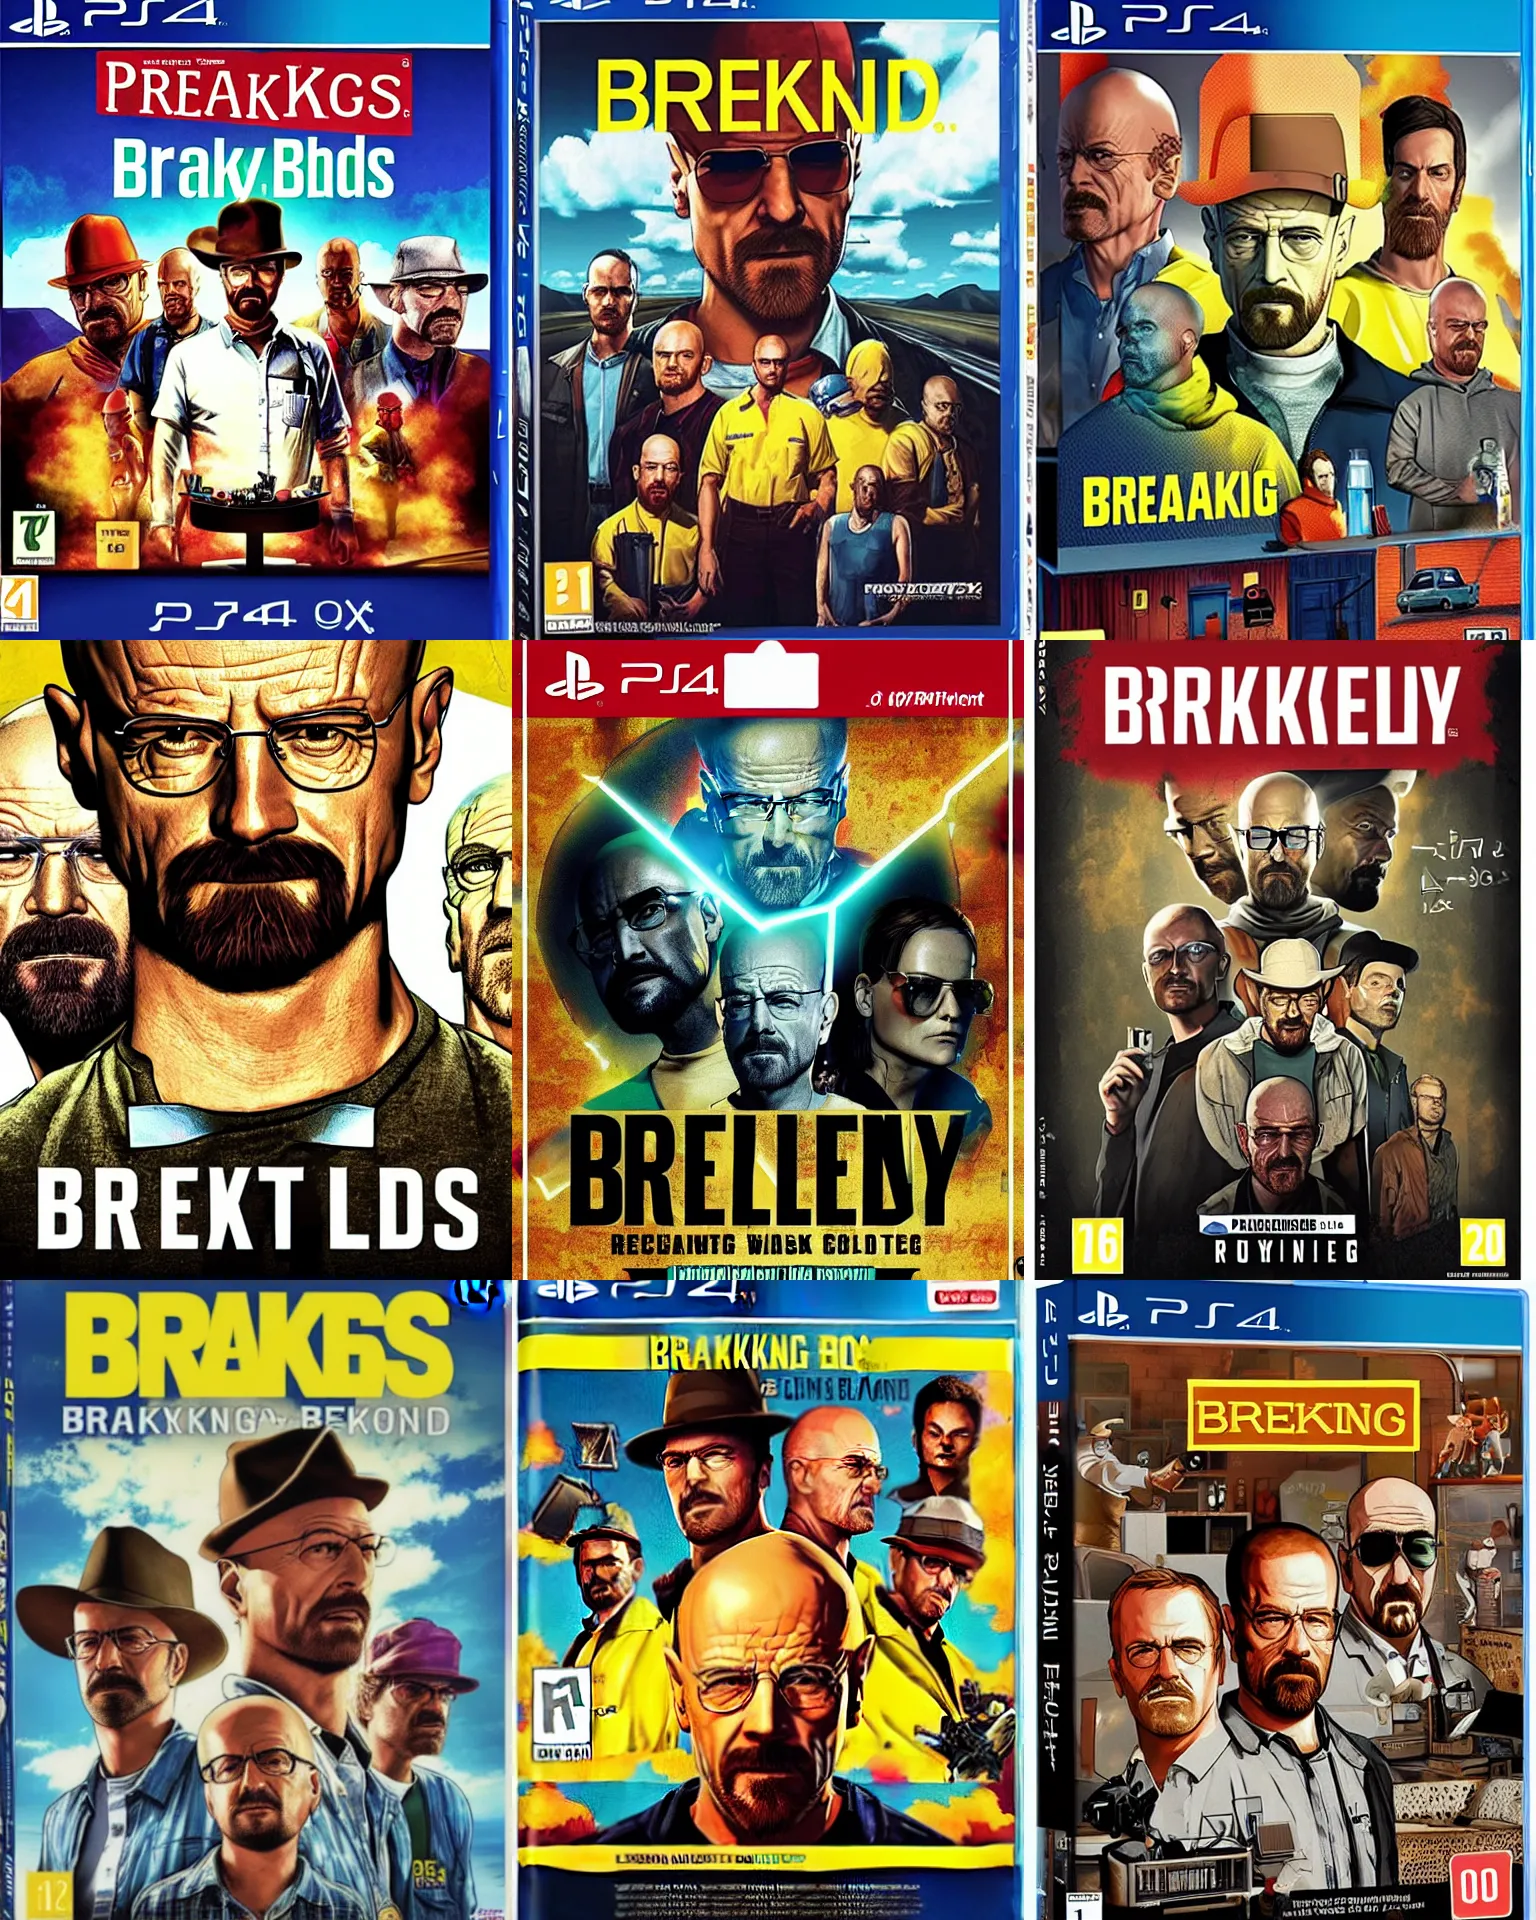 Modsigelse motor Stillehavsøer box art for a playstation 4 game about breaking bad, | Stable Diffusion |  OpenArt